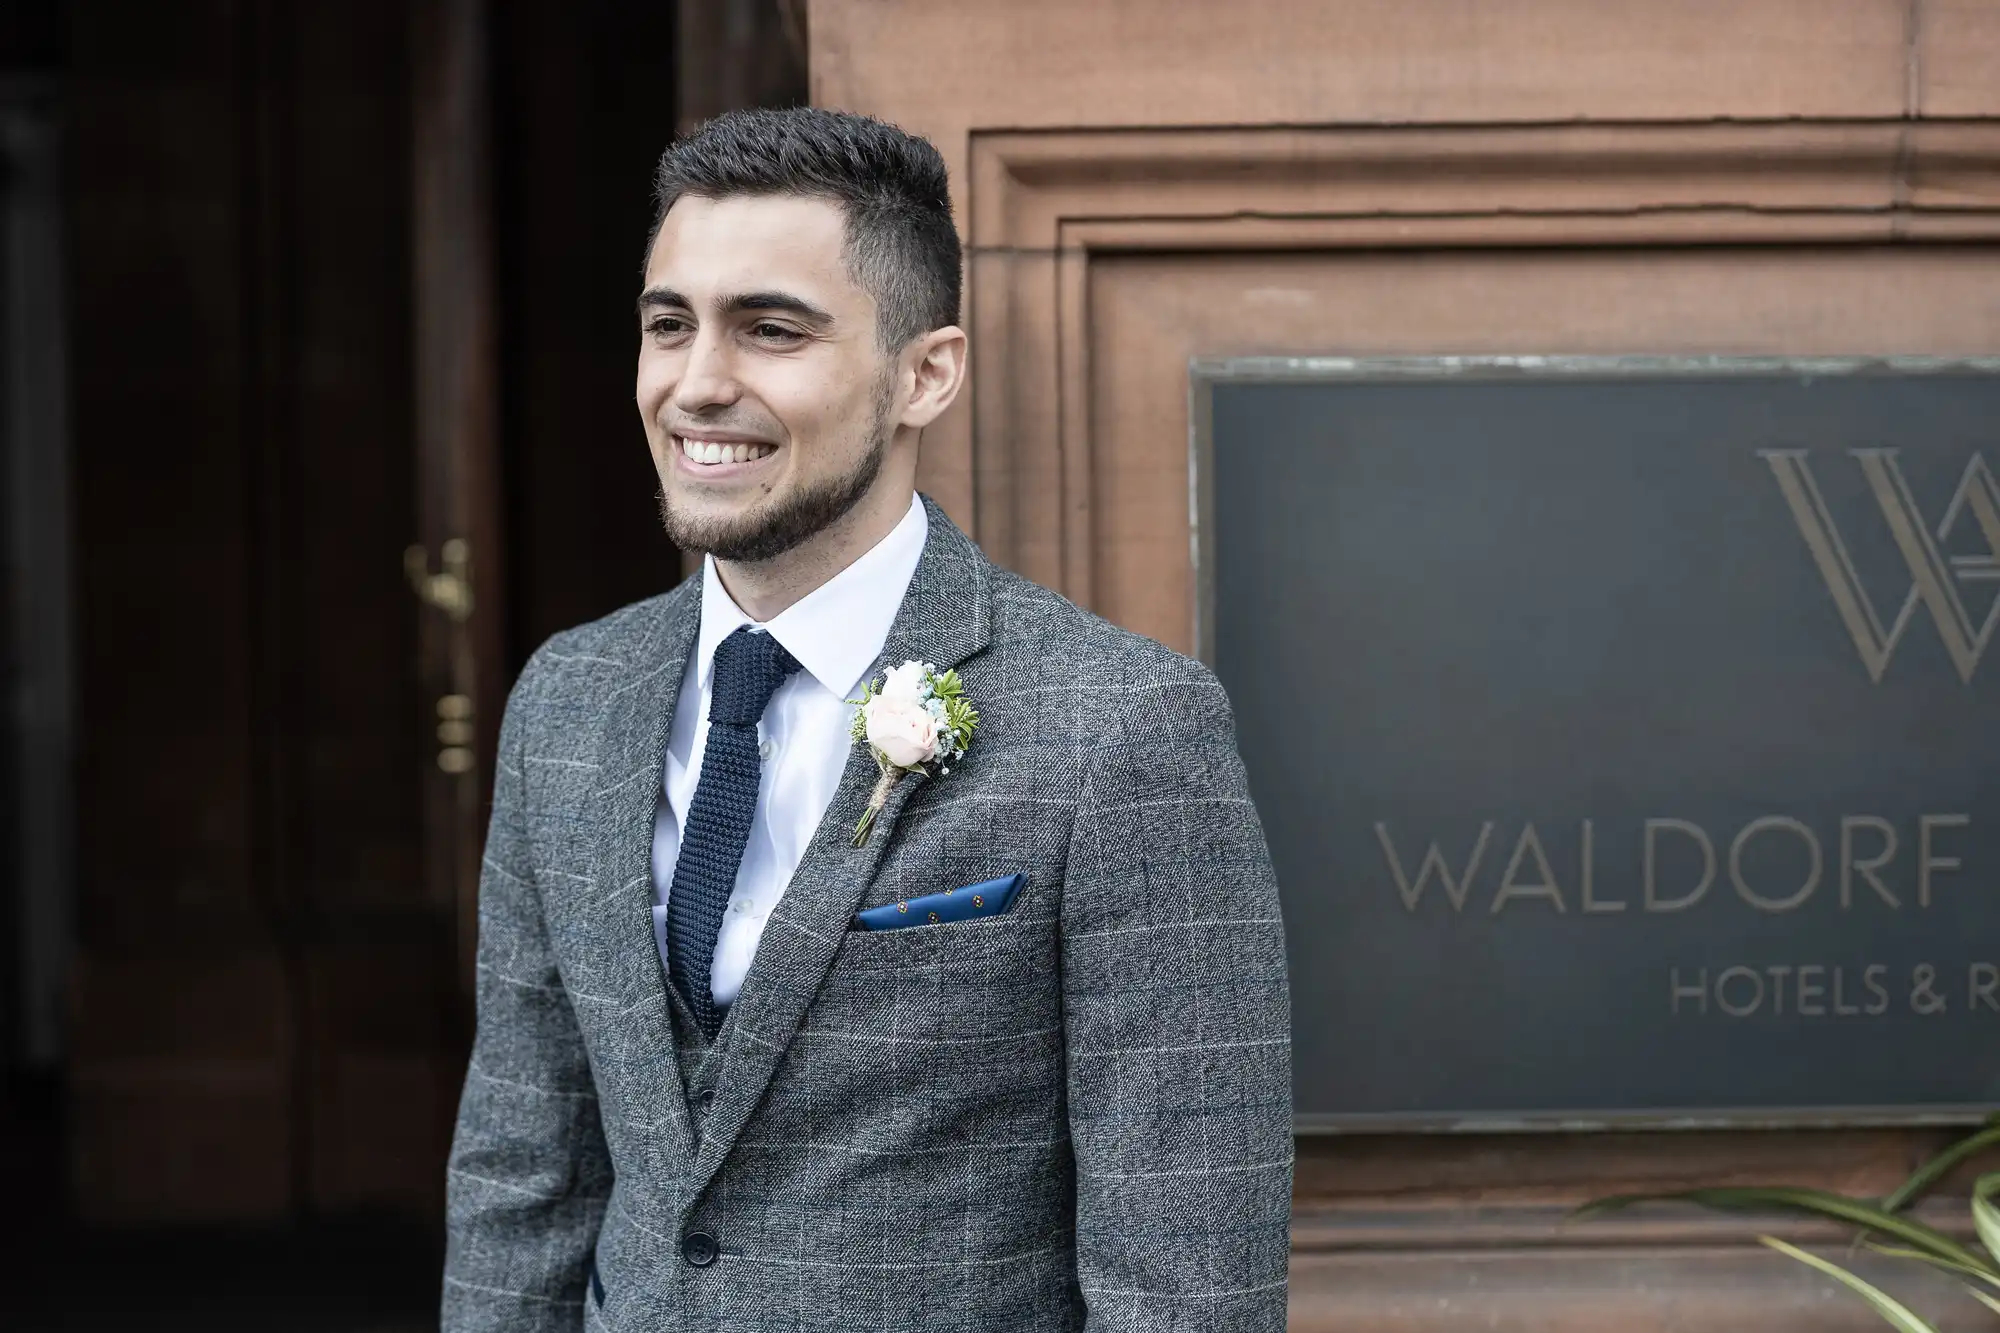 A man in a gray suit and tie, smiling, stands in front of a Waldorf Hotel sign.